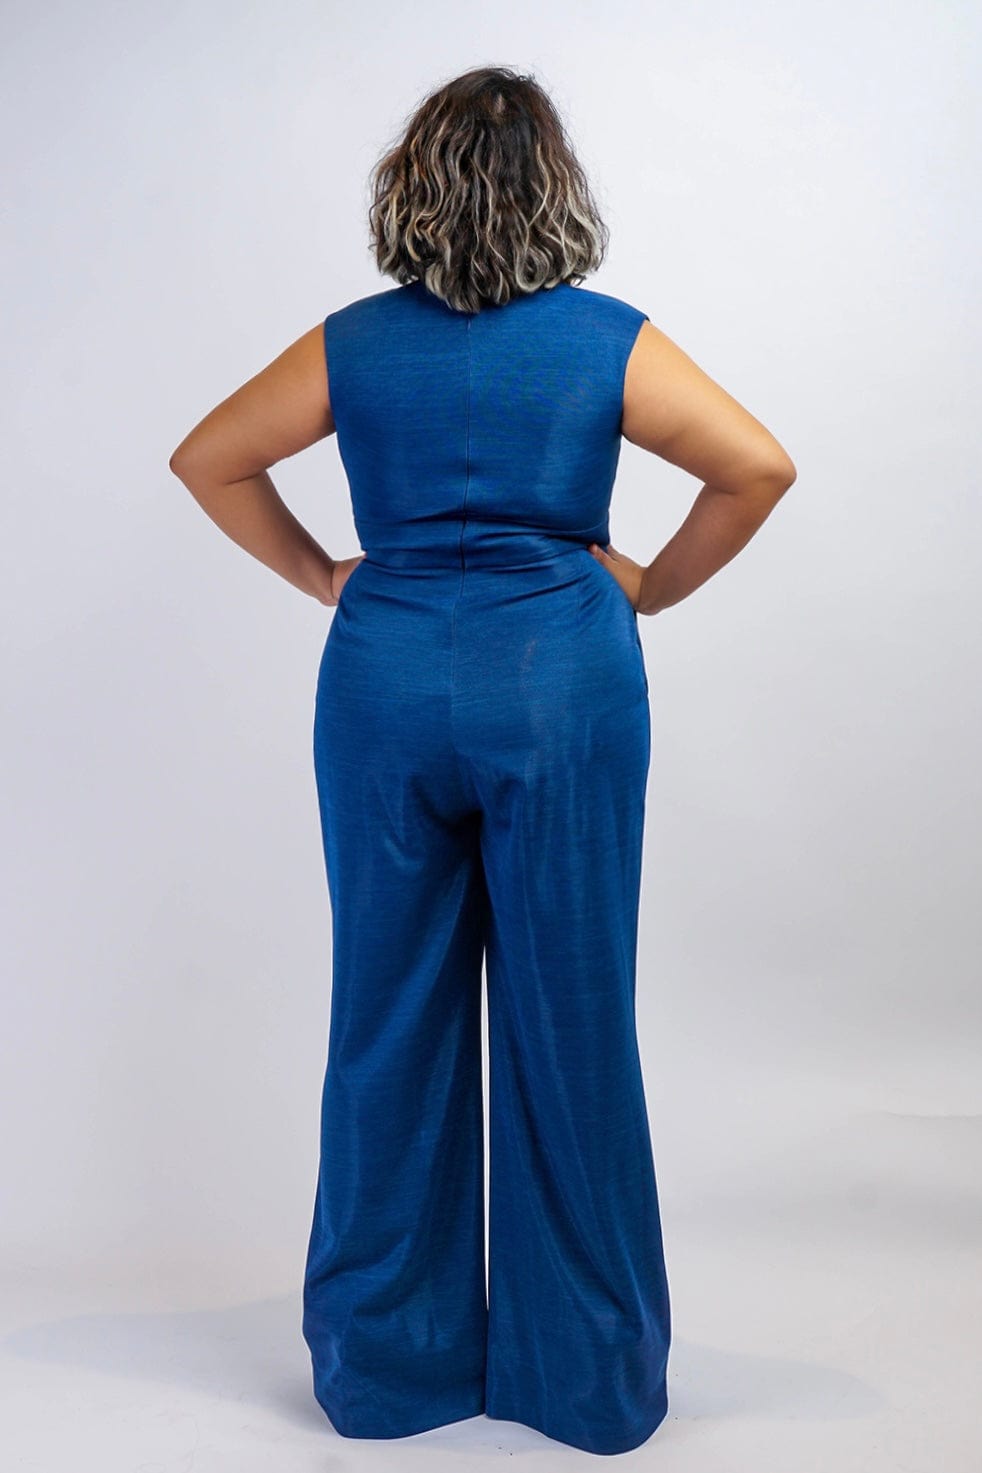 Chloe Dao JUMPSUITS &amp; ROMPERS Sapphire Blue Luxe V Neck Aiden Jumpsuit